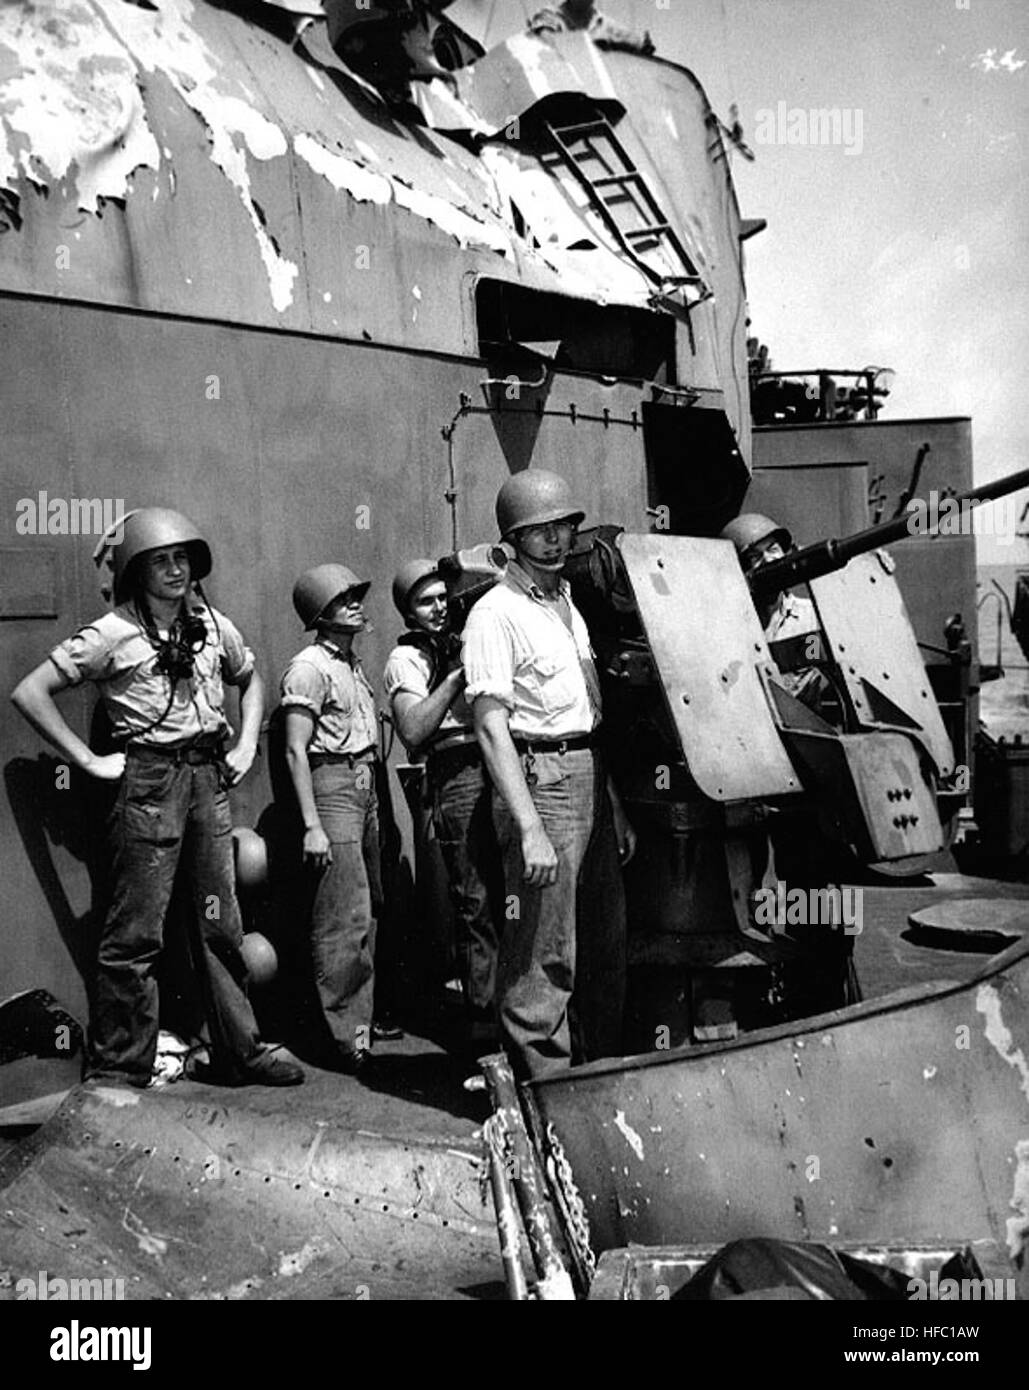 Crew of one of the ship's port forward 20mm guns pose by their weapon, at Guam, circa 16 June 1945. They had stuck to their post until knocked off their feet by the force of a second explosion, when Lindsey was struck by two Kamikaze planes off Okinawa on 12 April 1945. Note severely damaged plating in the vicinity. The men are (left to right): CM3c Edwin K. Kayden; GM3c Balanor Easebio; Y2c Chester F. Fluharty; S1c Fred M. Gorges; S1c Robert F. Zelenka.  Official U.S. Navy Photograph, now in the collections of the National Archives. Gun crew on USS Lindsey (DM-32) in June 1945 Stock Photo